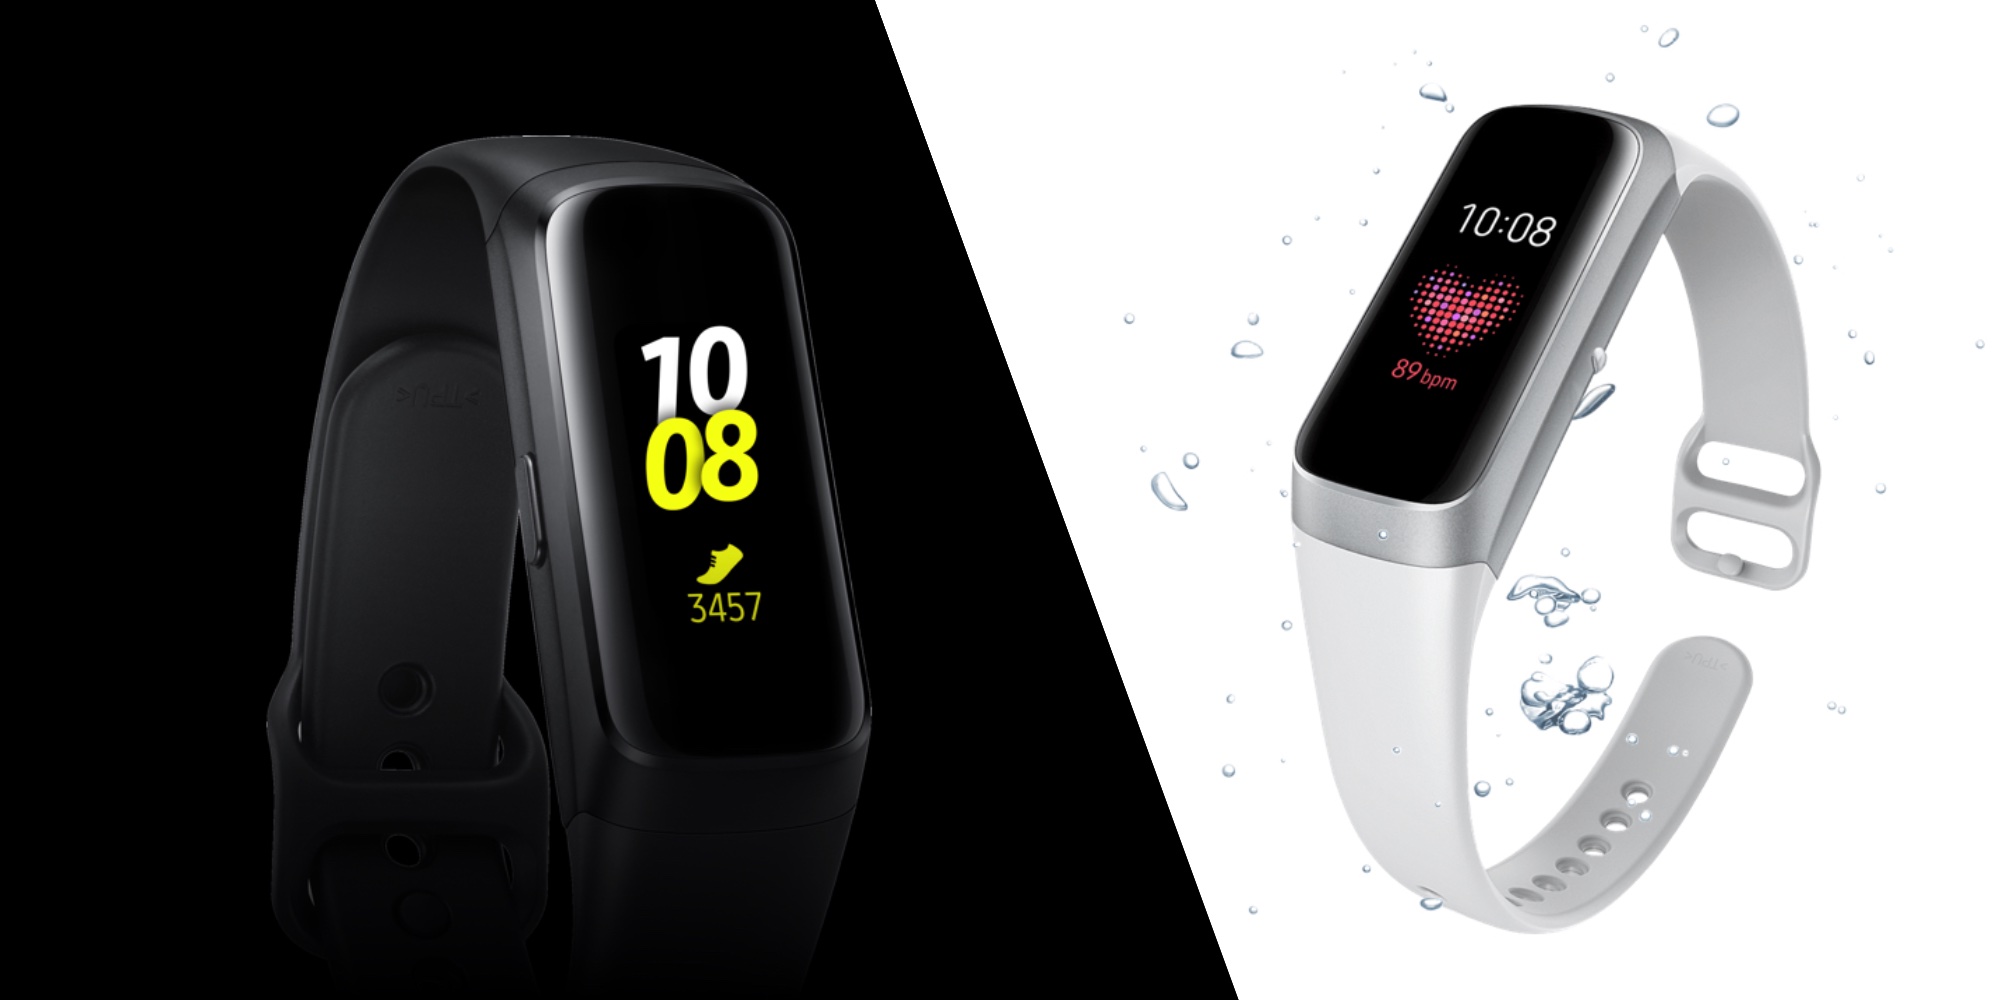 Samsung Galaxy Fit beats the projected Black Friday price at $59 (Reg ...